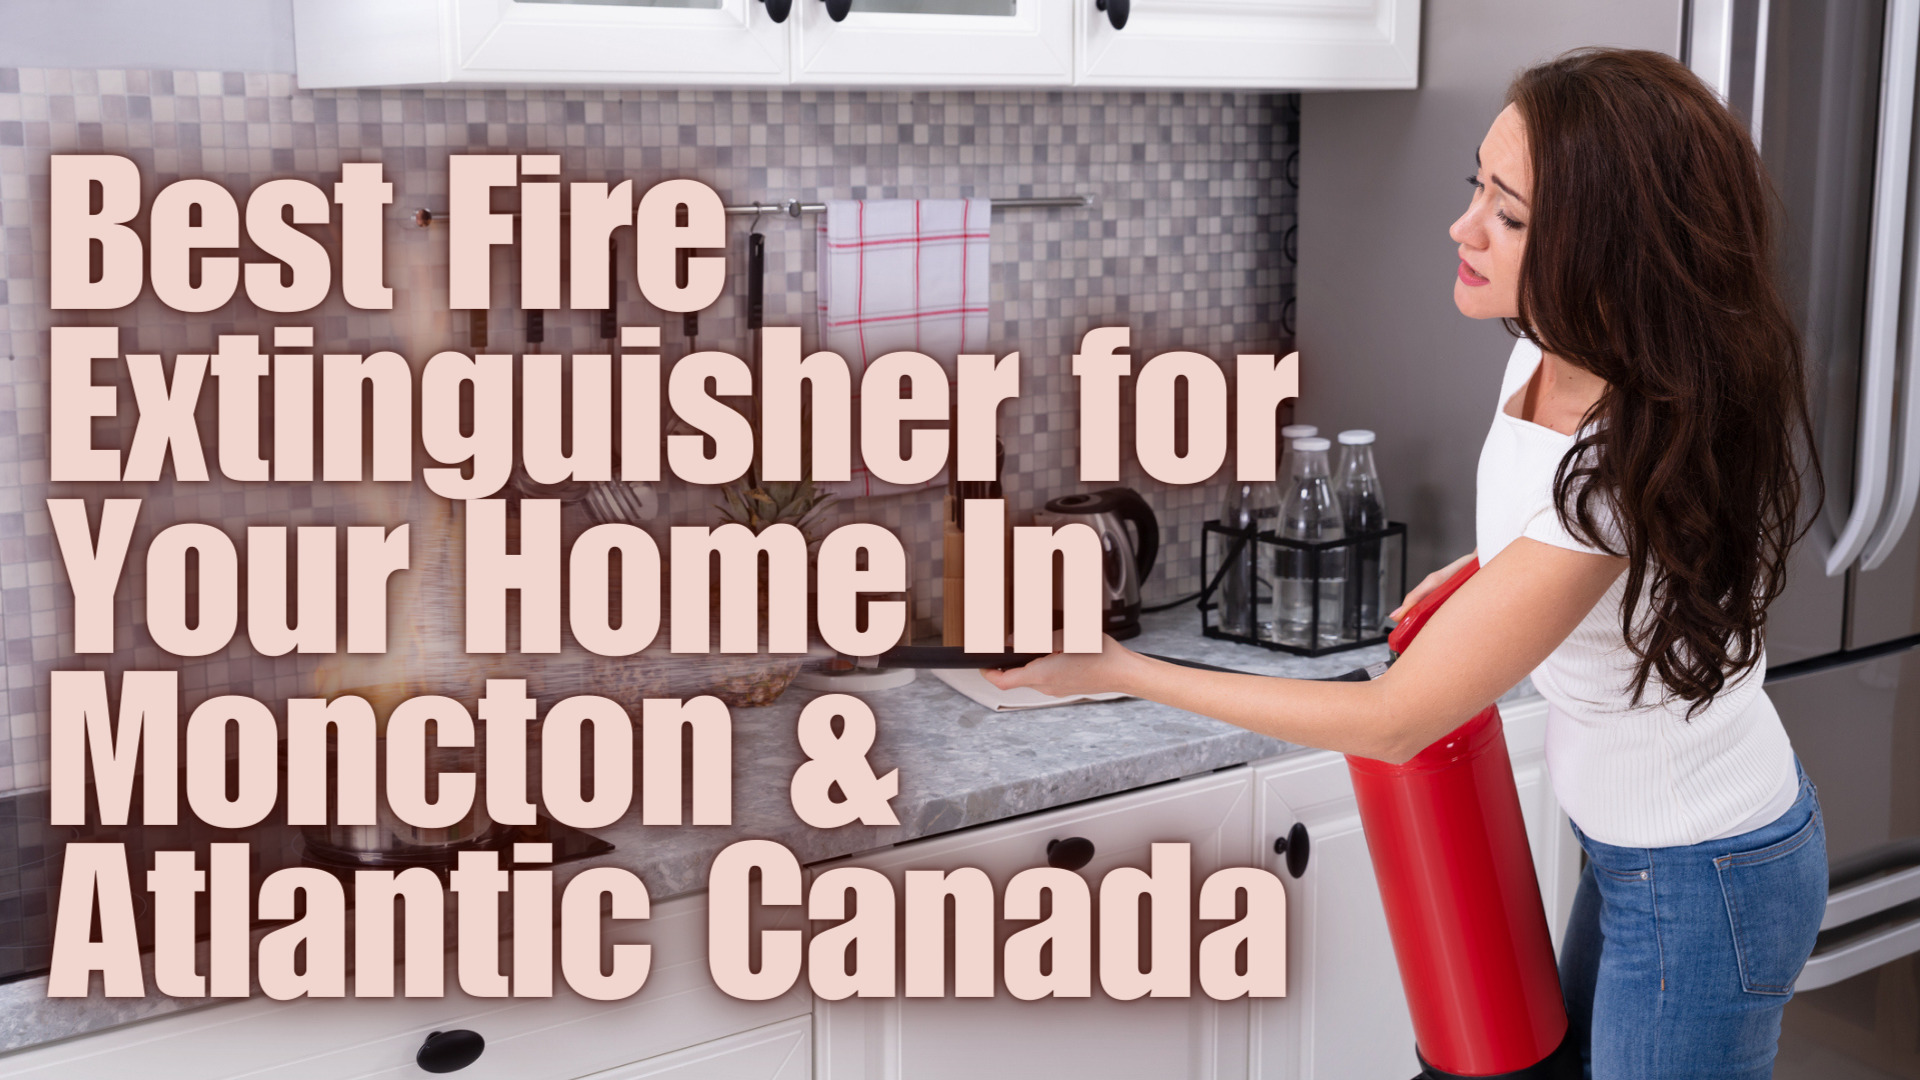 Best Fire Extinguisher for Your Home In Moncton & Atlantic Canada